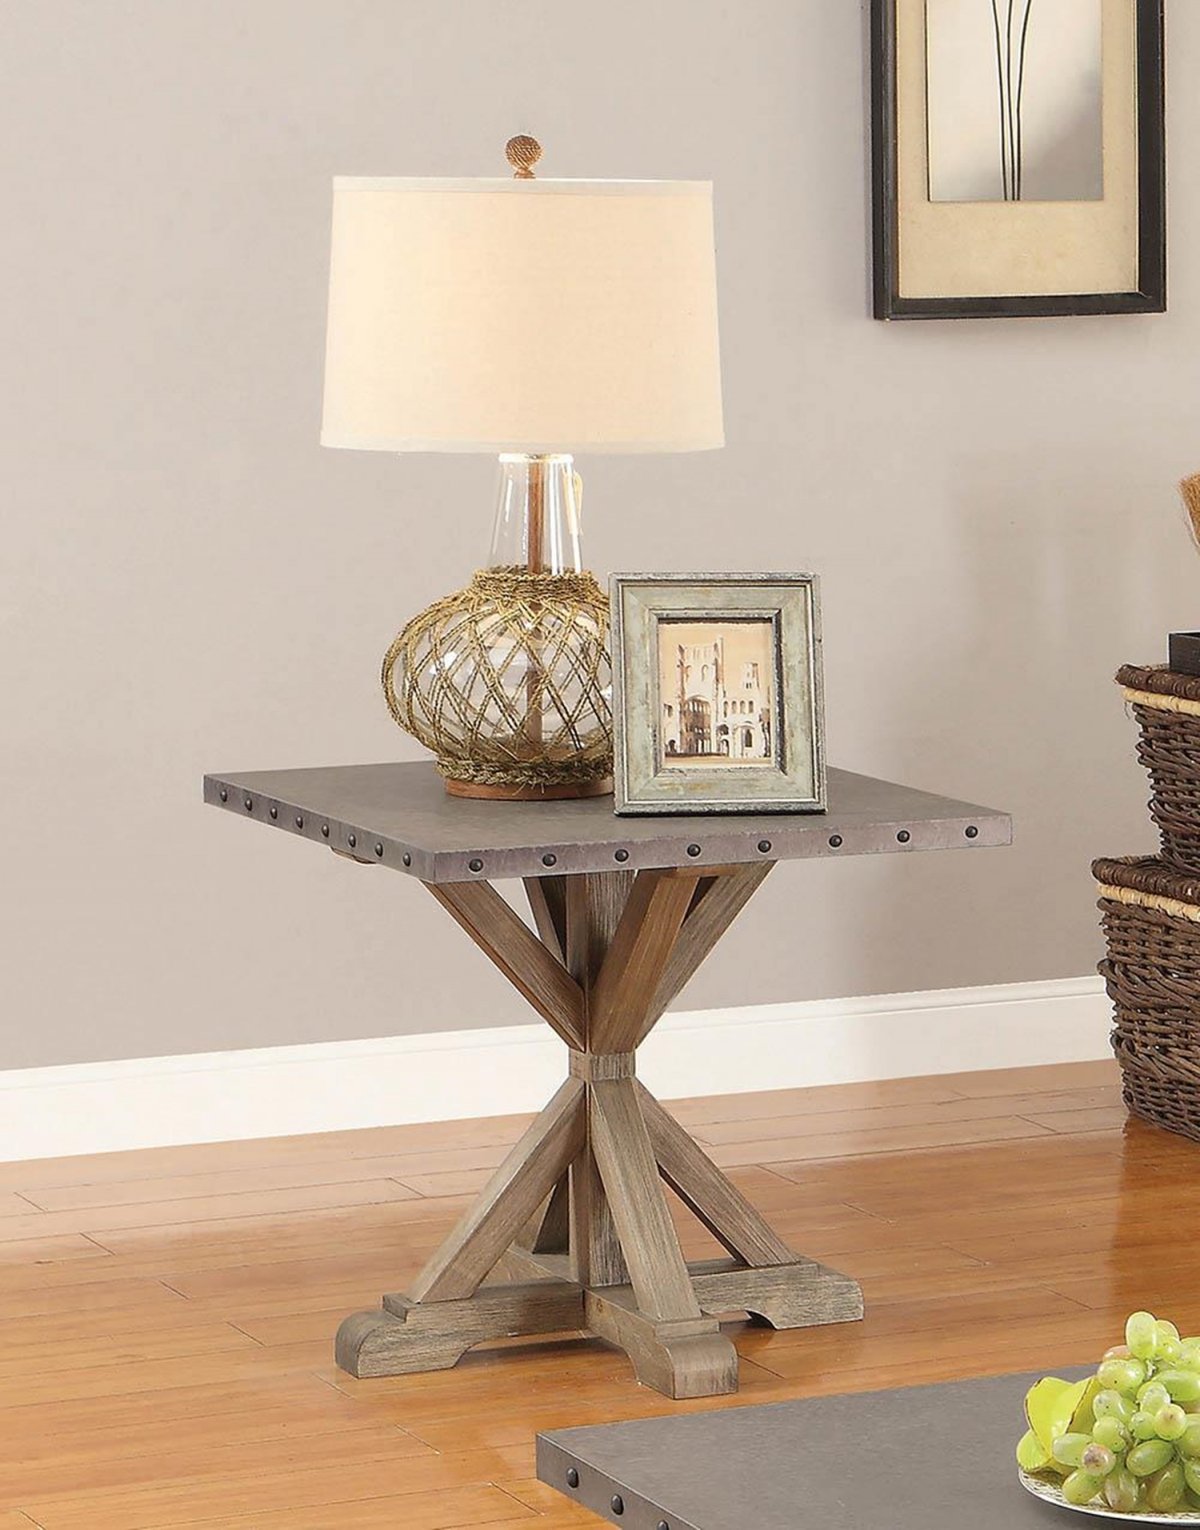 Industrial Driftwood End Table